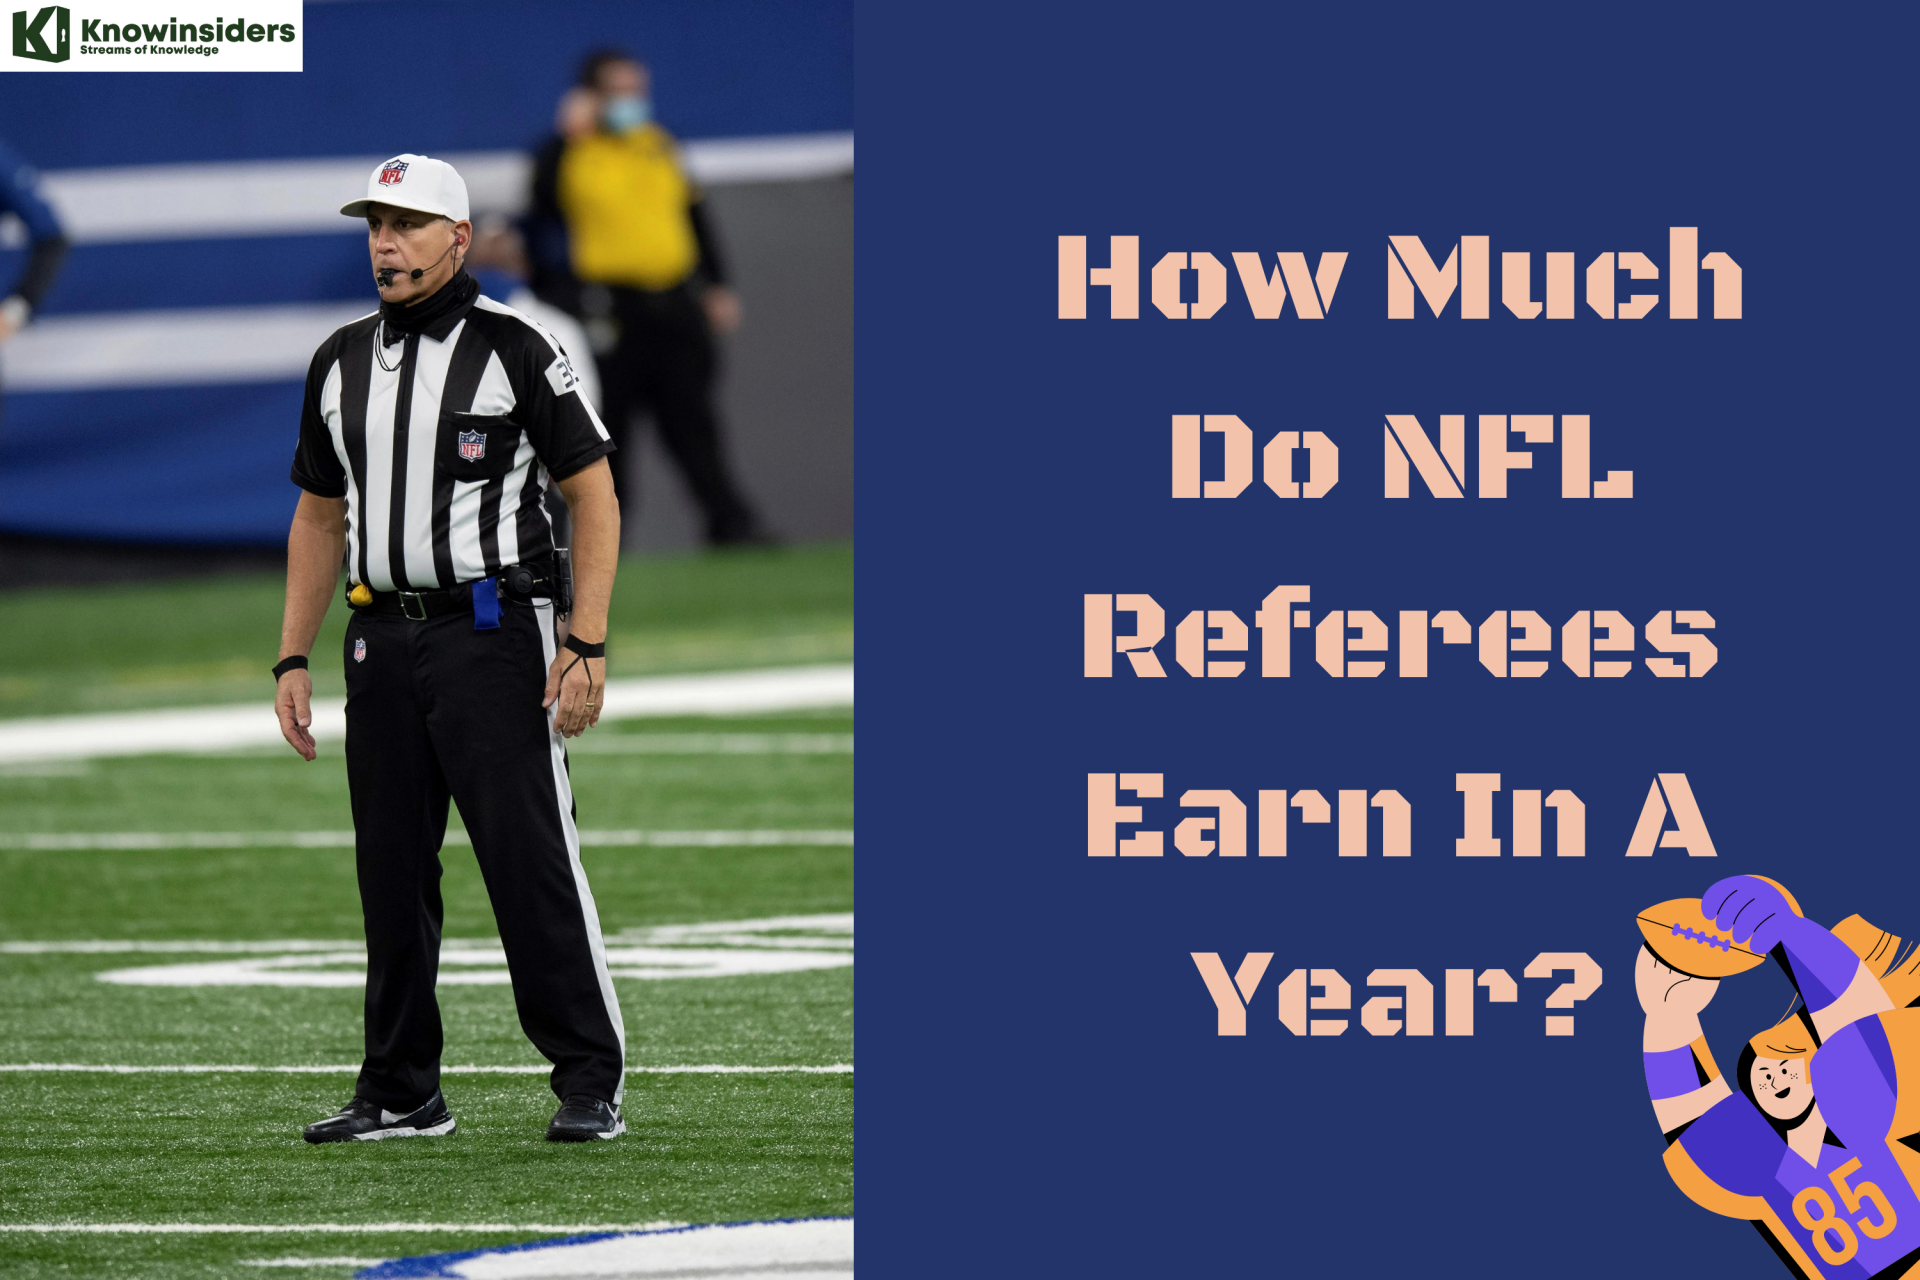 How Much Do NFL Referees Earn In A Year?